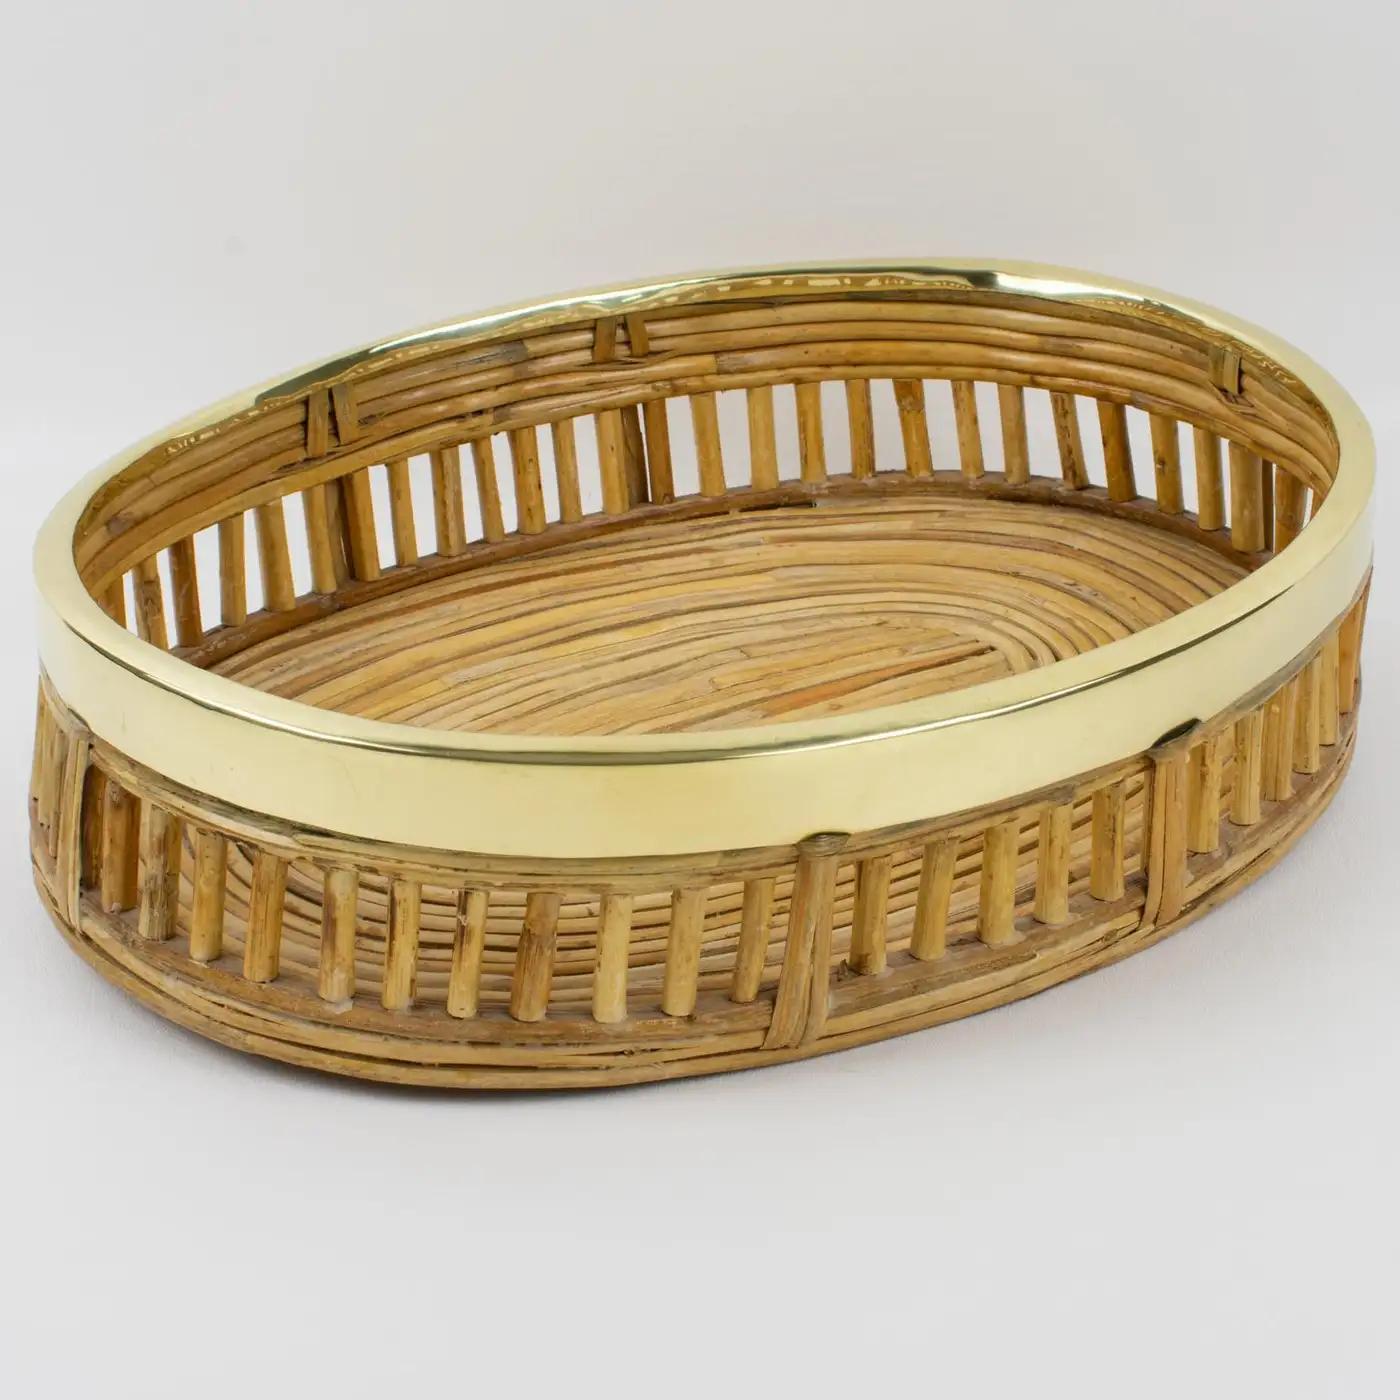 Italian Rattan Bamboo Wicker and Brass Bowl Basket Centerpiece, Italy 1960s For Sale